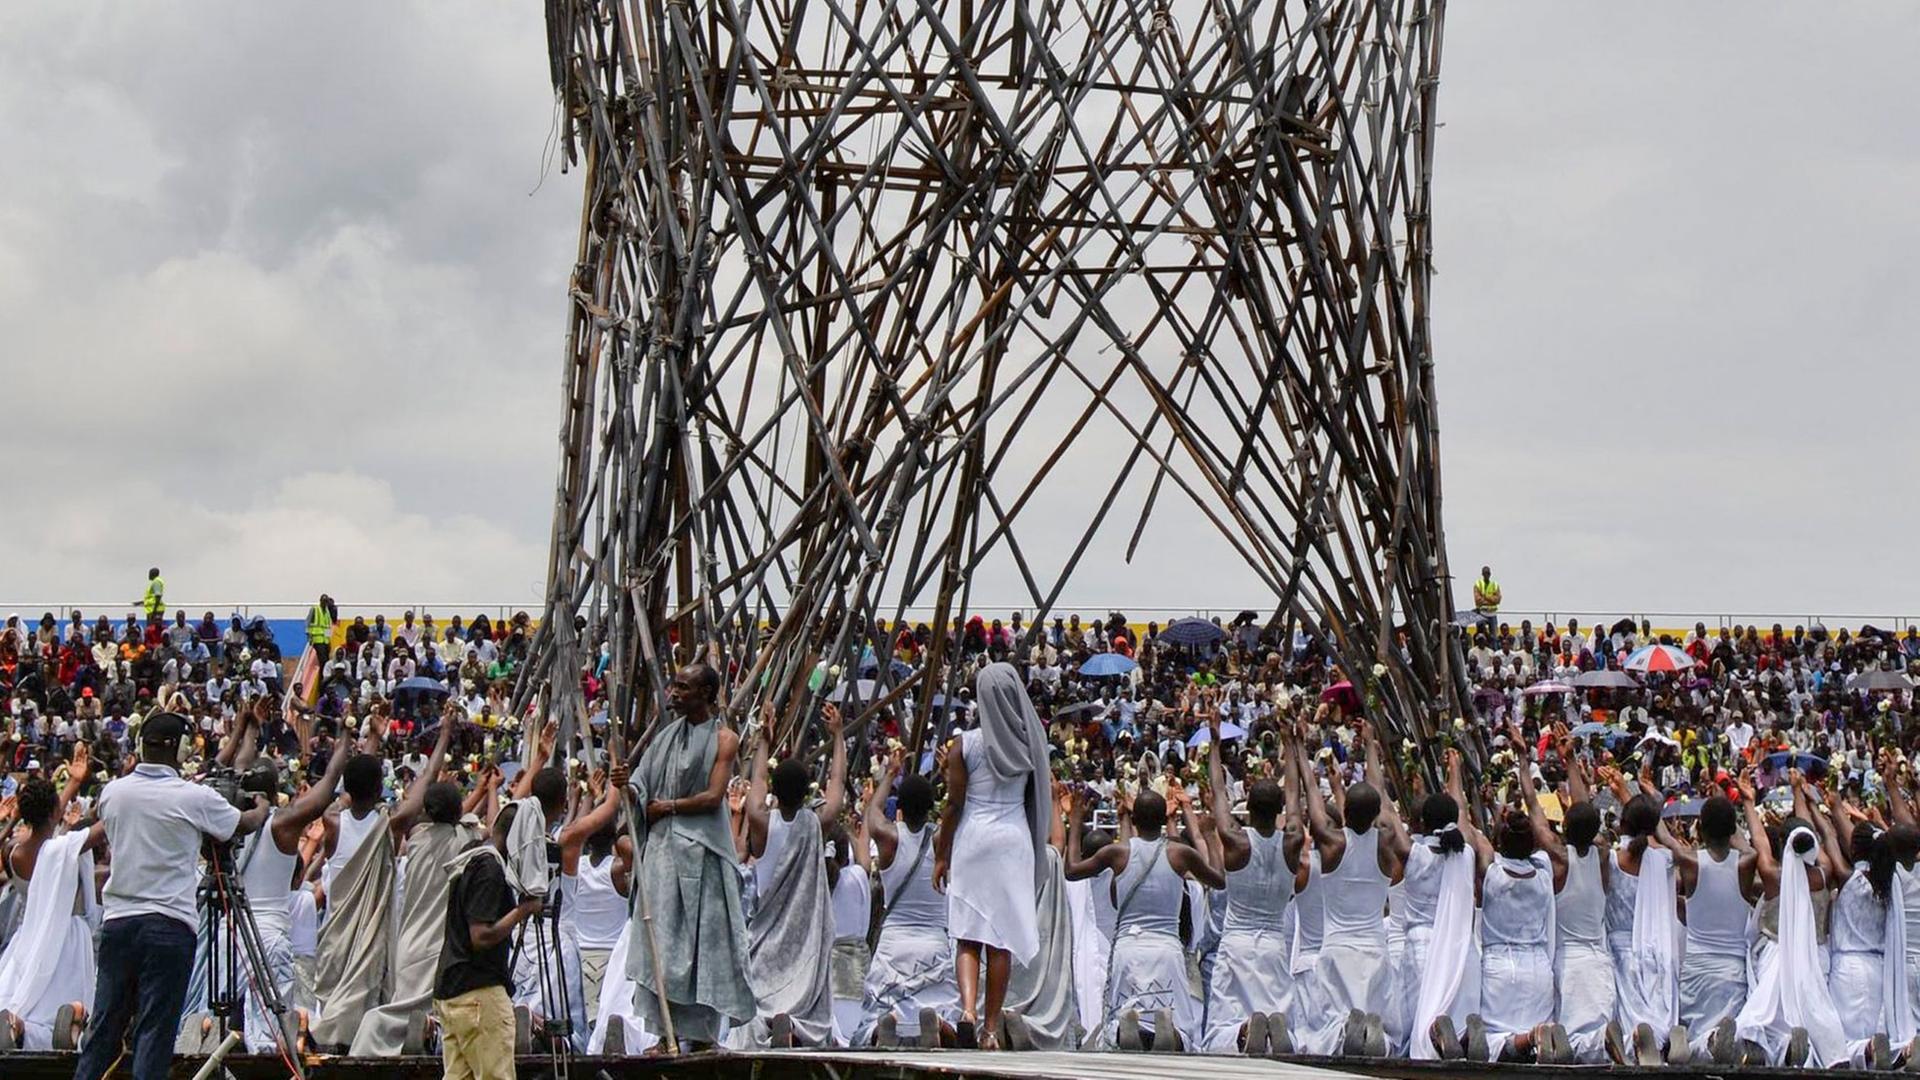 Performers pray in commemoration during an event to commemorate the 20th anniversary of the Rwandan genocide at Amahoro stadium in the capital Kigali, Rwanda, 07 April 2014.